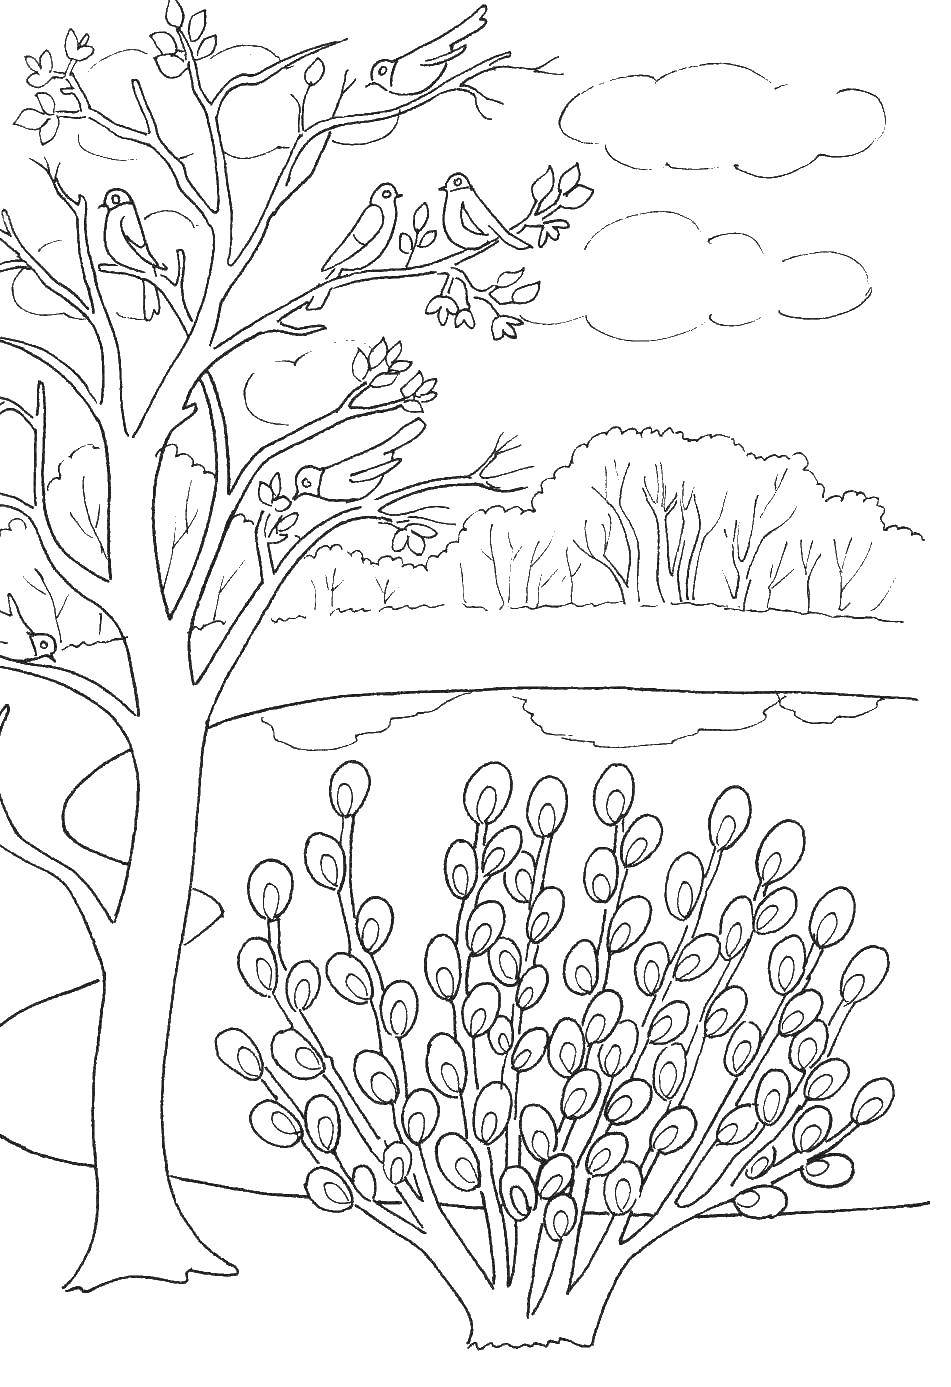 Coloring The birds in the trees. Category spring. Tags:  Birds, spring, willow.